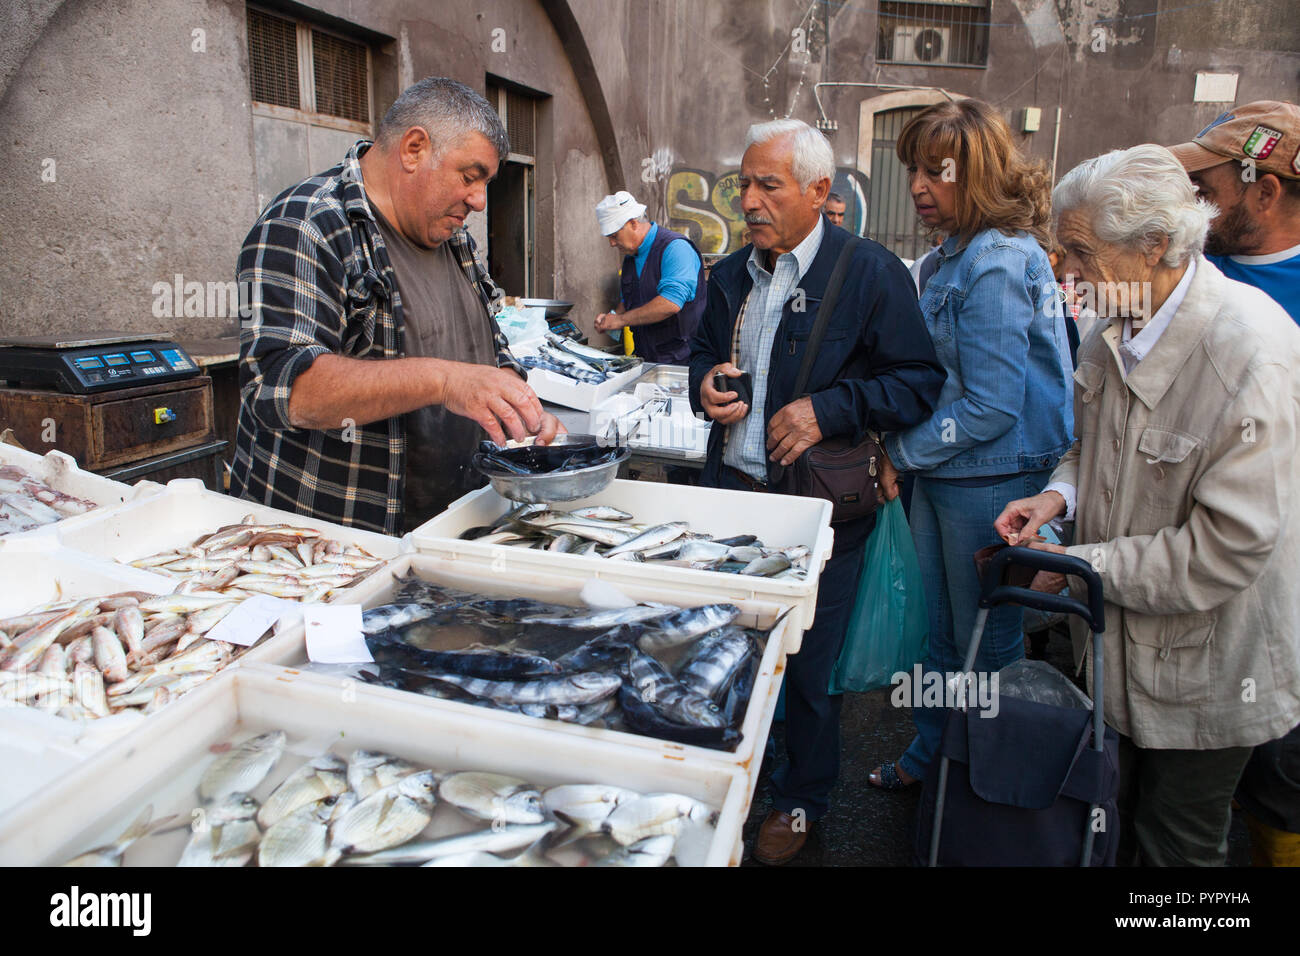 A fishmonger serves customers in the fish market in Catania, Sicily Stock Photo